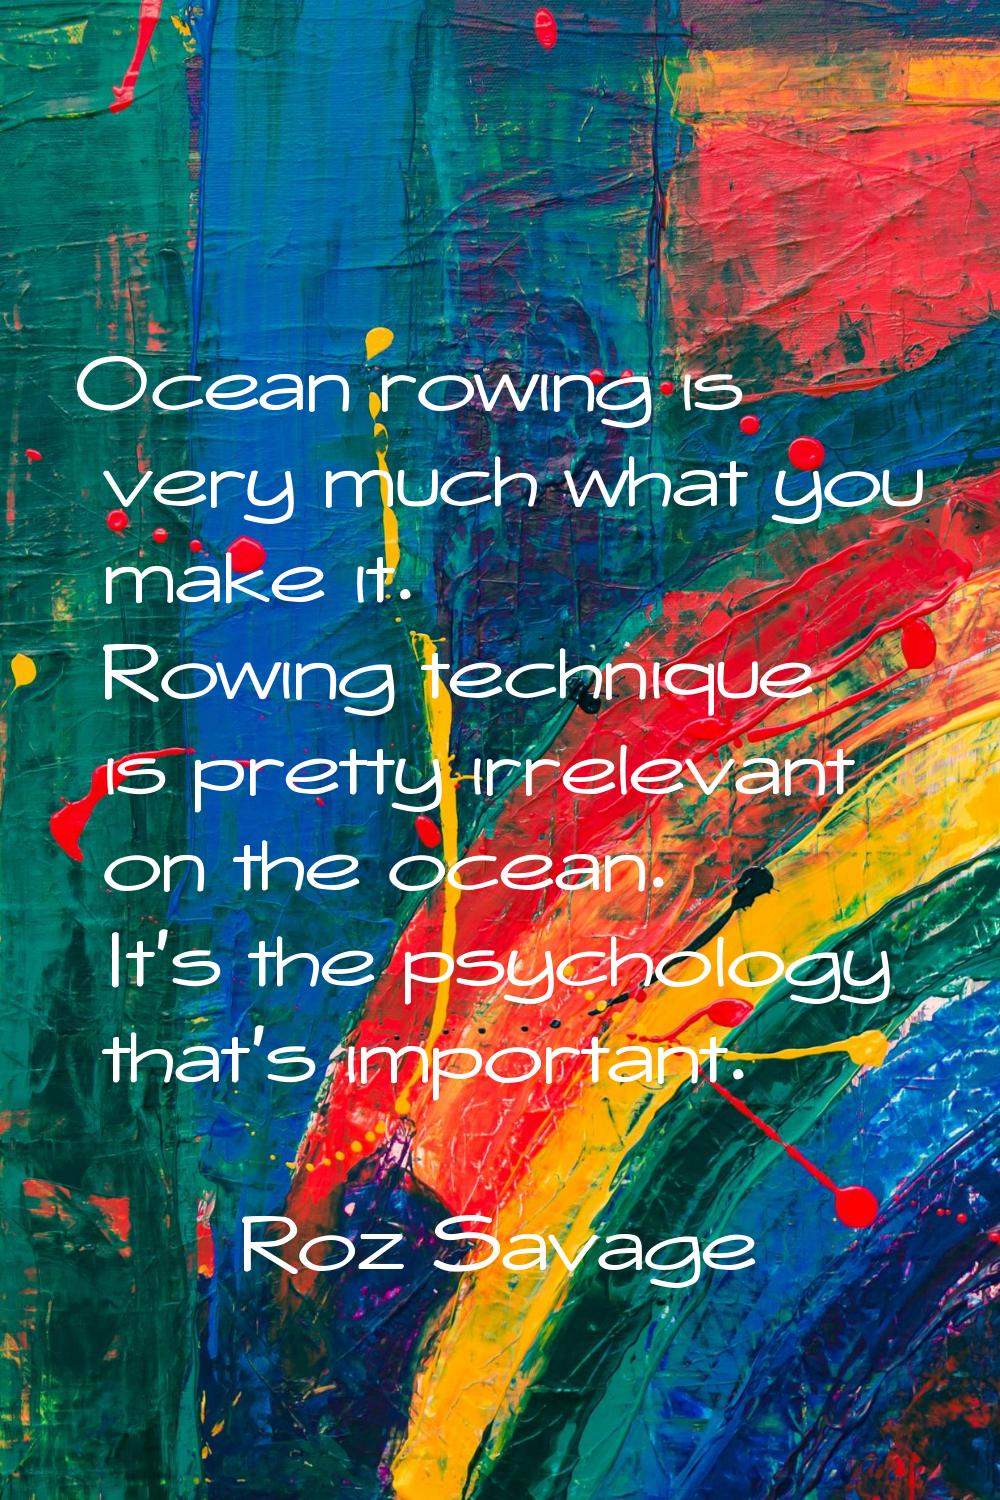 Ocean rowing is very much what you make it. Rowing technique is pretty irrelevant on the ocean. It'